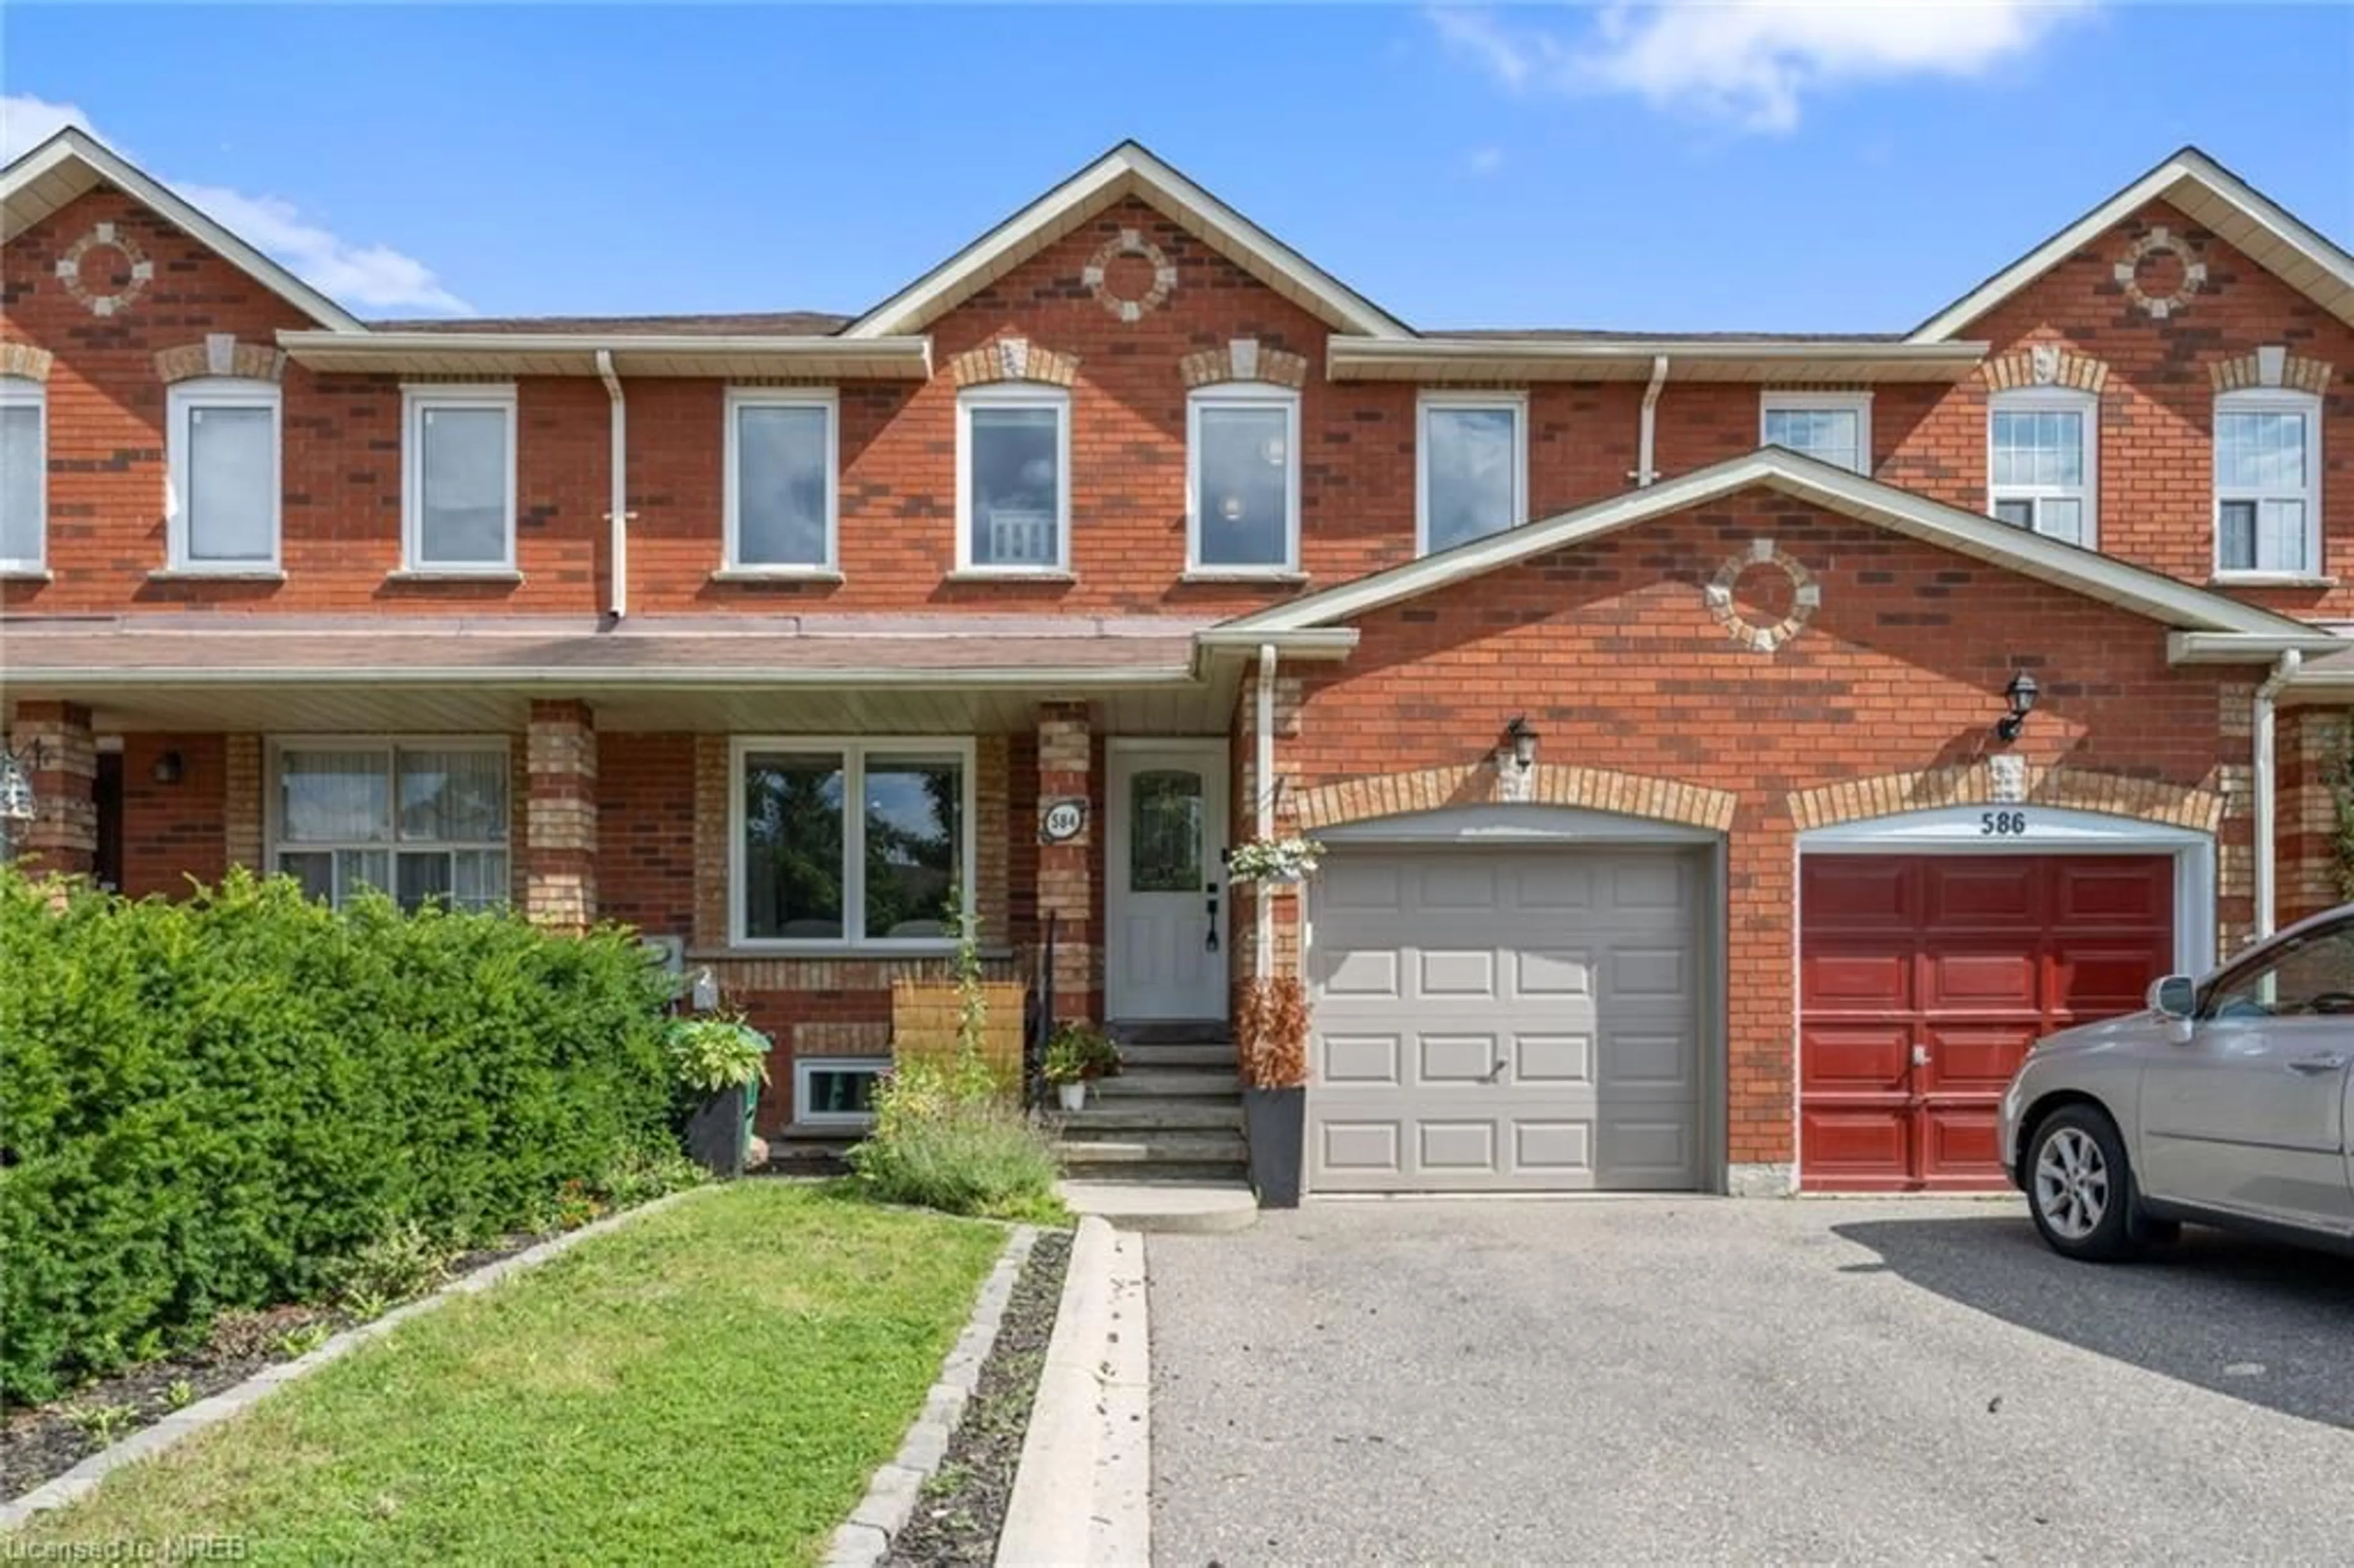 Home with brick exterior material for 584 Ashprior Ave, Mississauga Ontario L5R 3N2